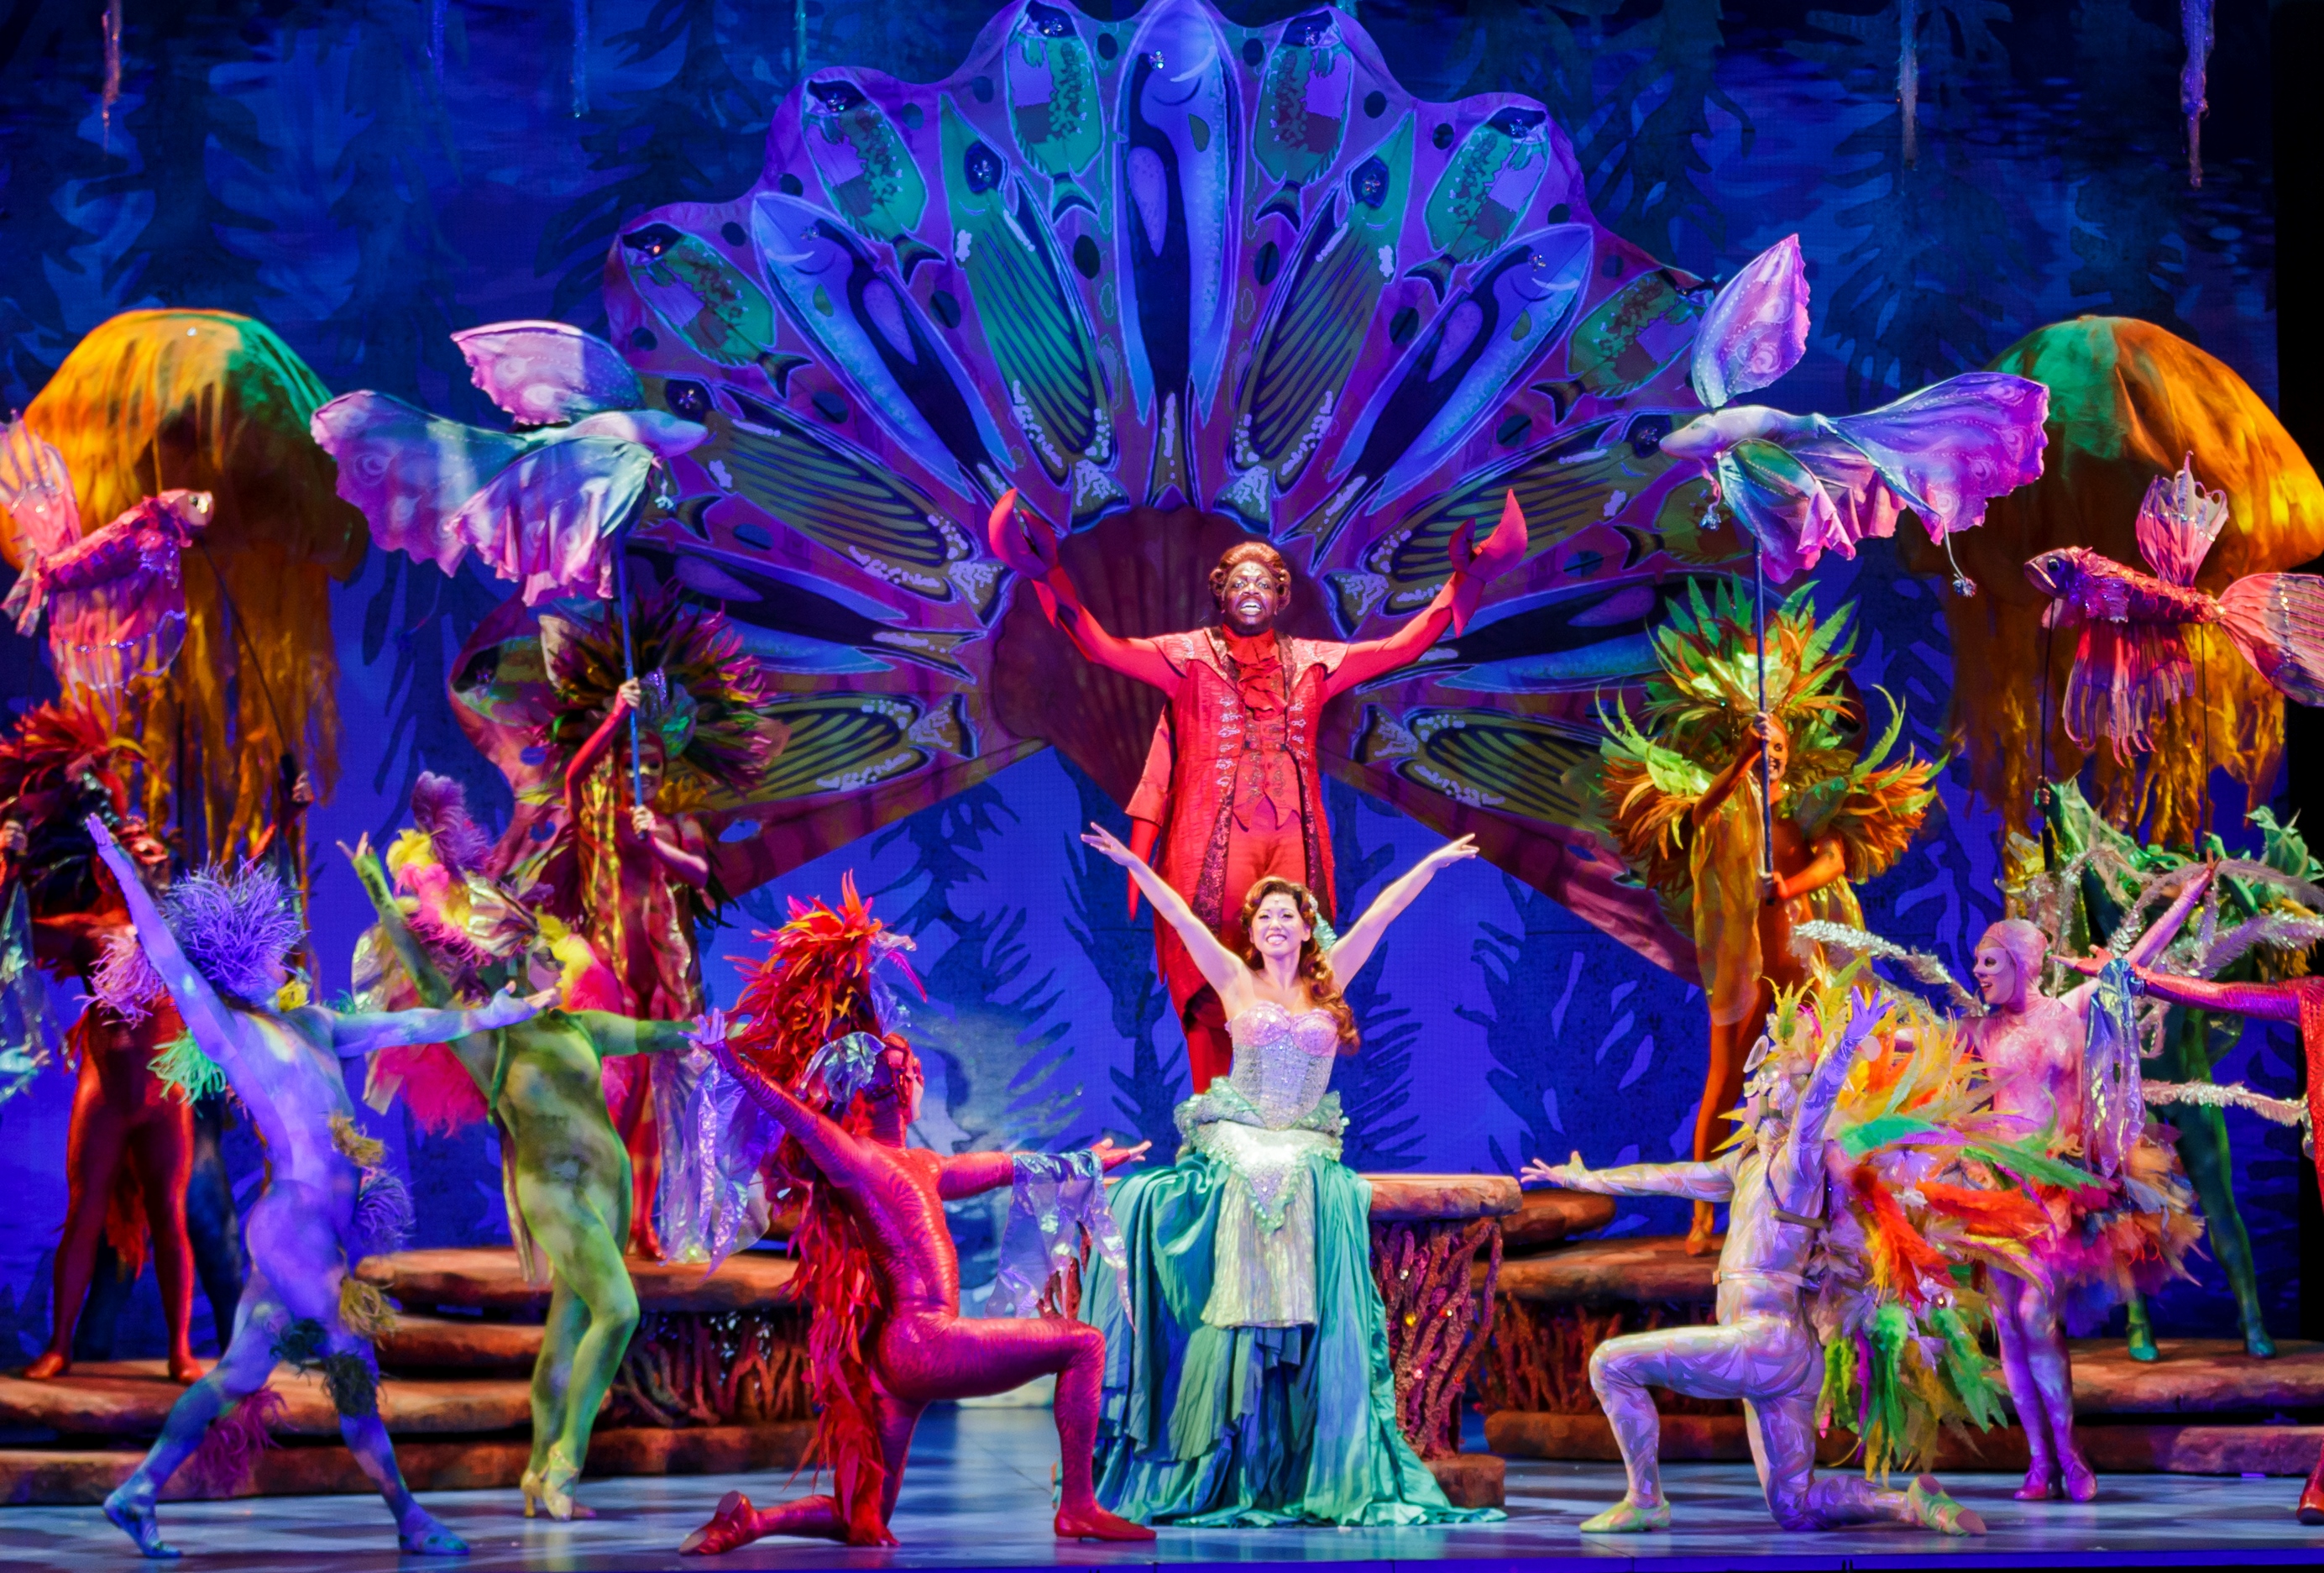 Meet The Cast Of The Little Mermaid The Broadway Musical At The